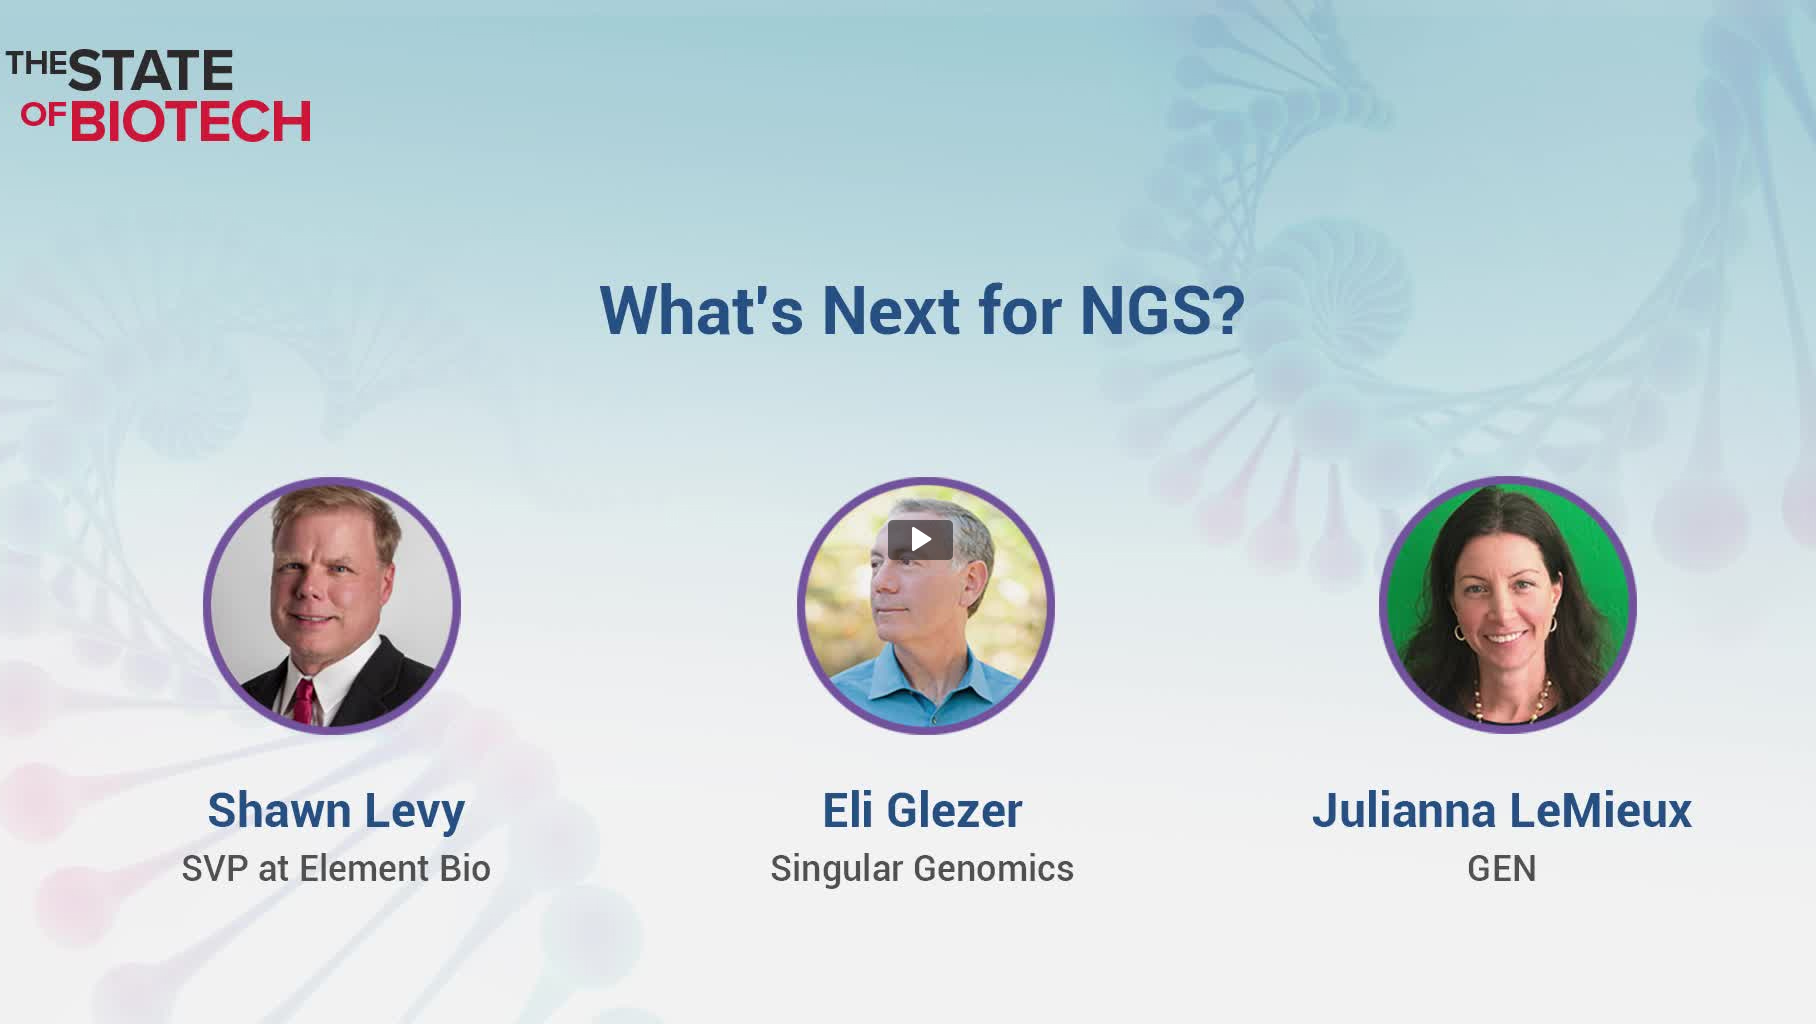 What's Next for NGS? A Conversation with Eli Glezer and Shawn Levy